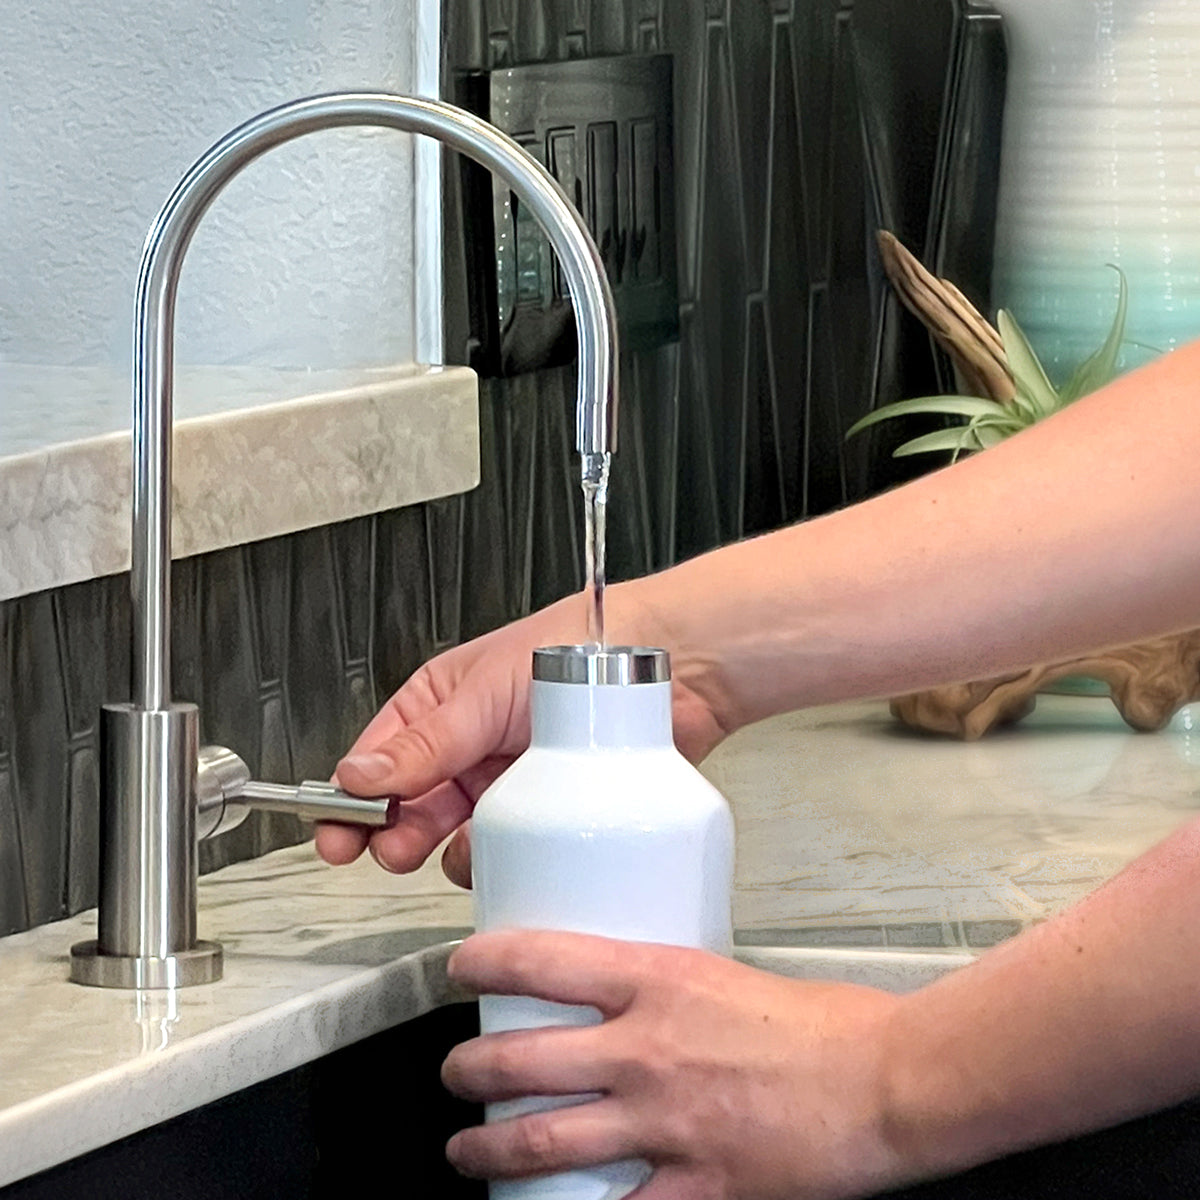 Faucet Mount System, Water Faucet Filtration System with Filter Change  Reminder, Reduces Lead, Made Without BPA, Fits Standard Faucets Only,  Elite